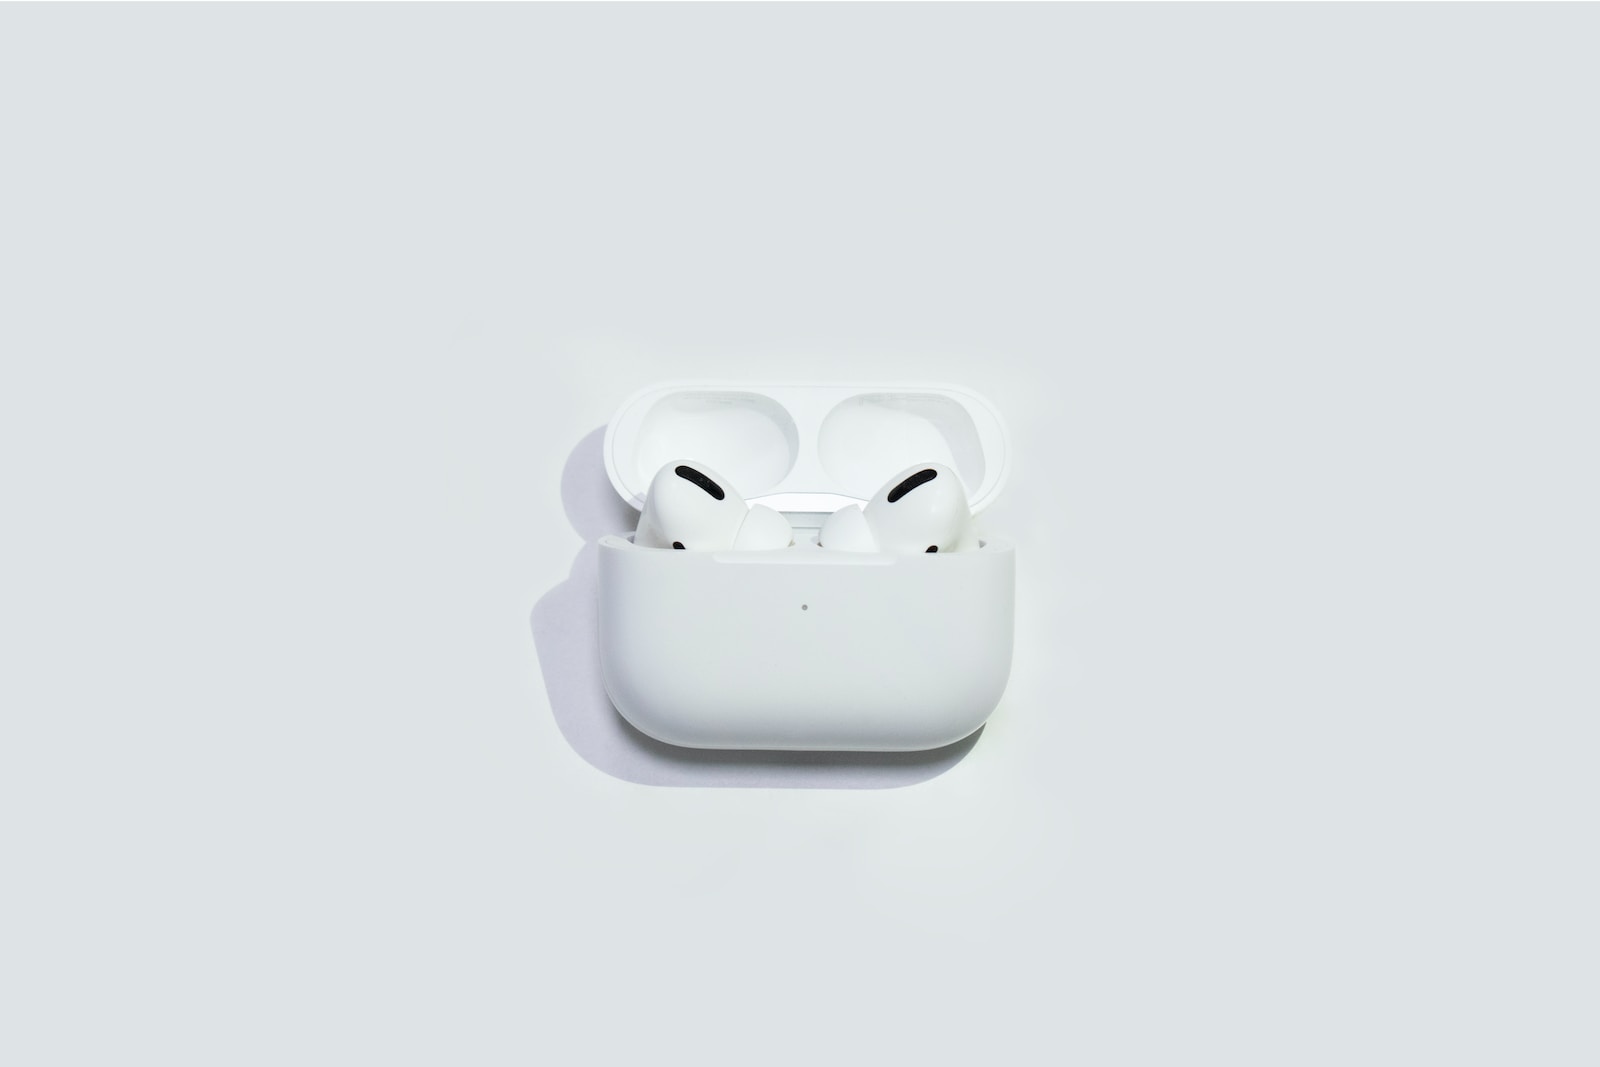 why is my airpod case dying so fast?